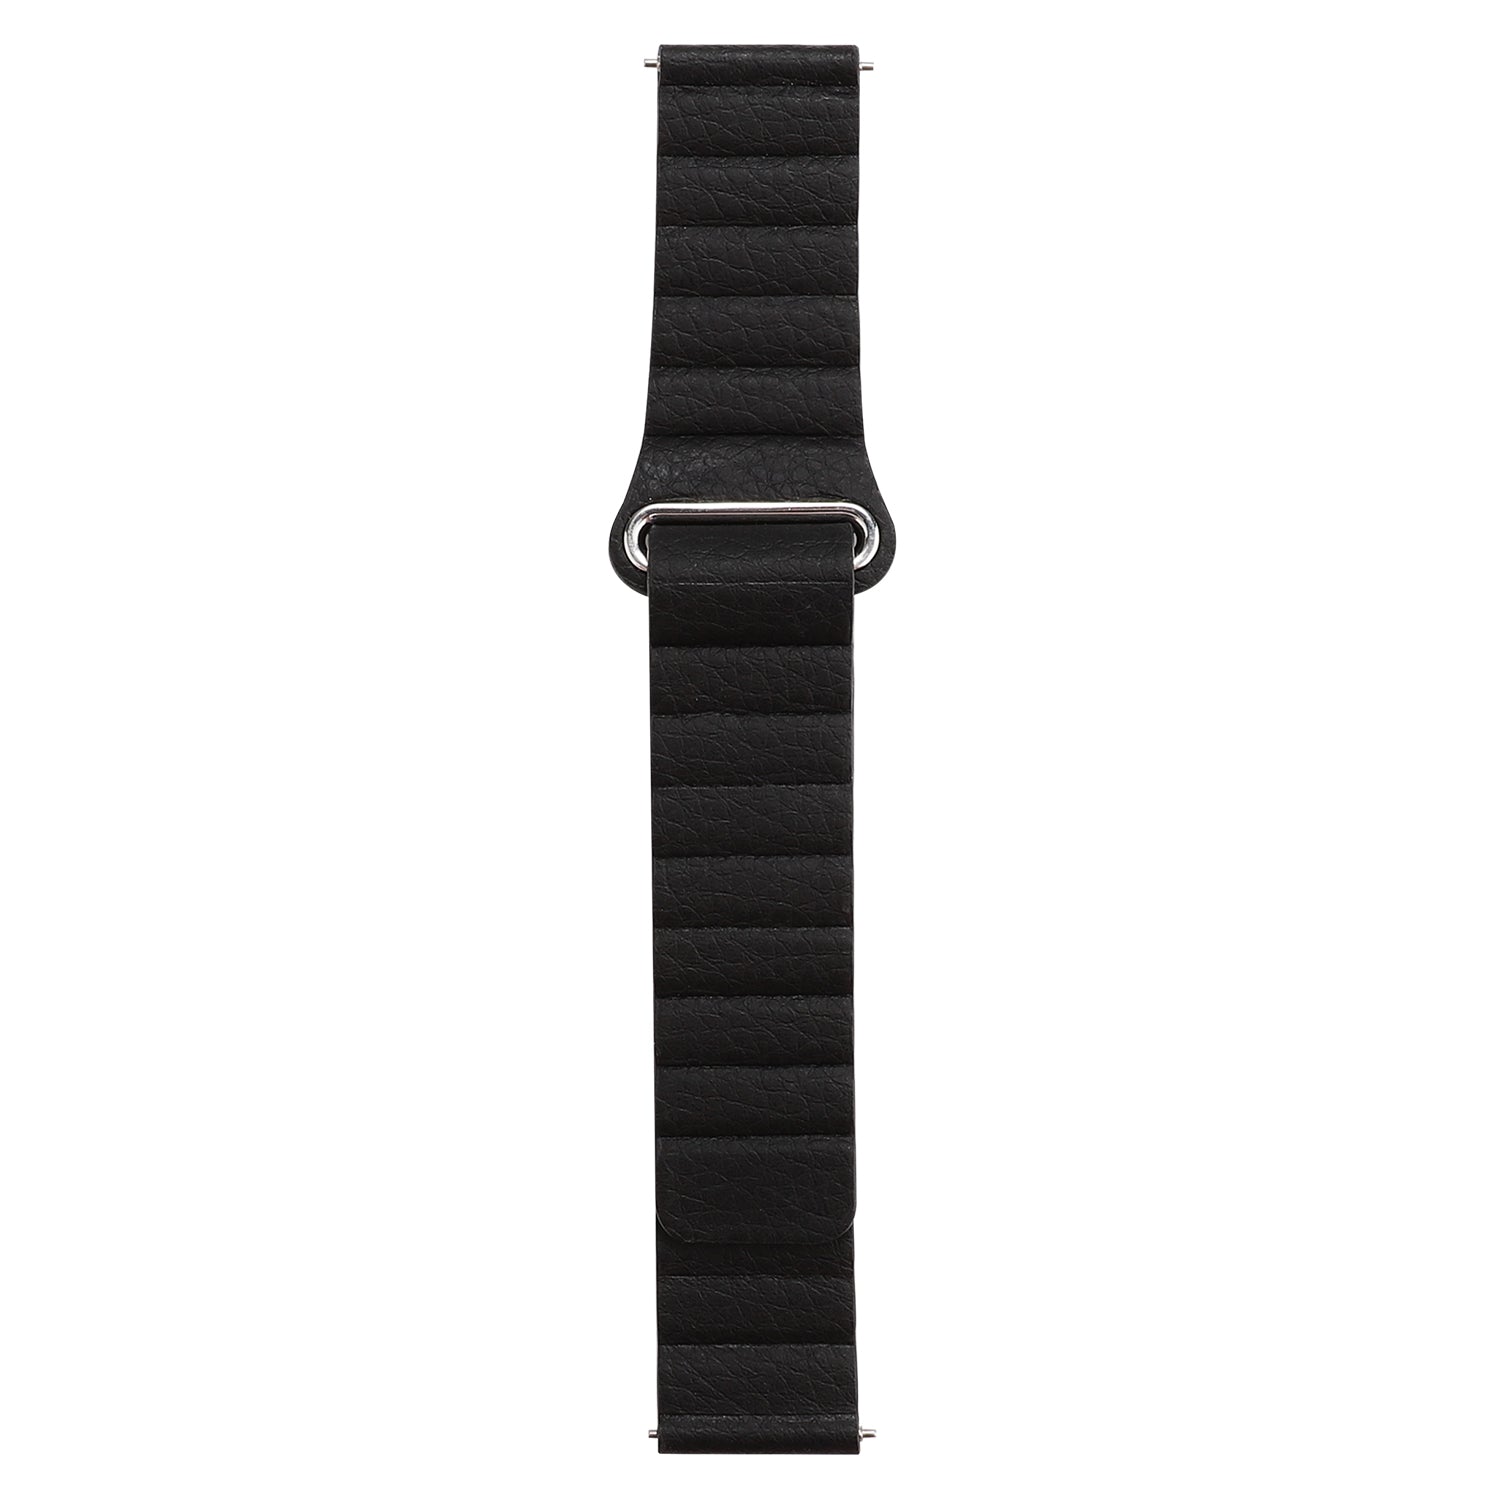 Genuine Leather Watchband Replacement 18mm for Garmin Move 3S/Active S - Black